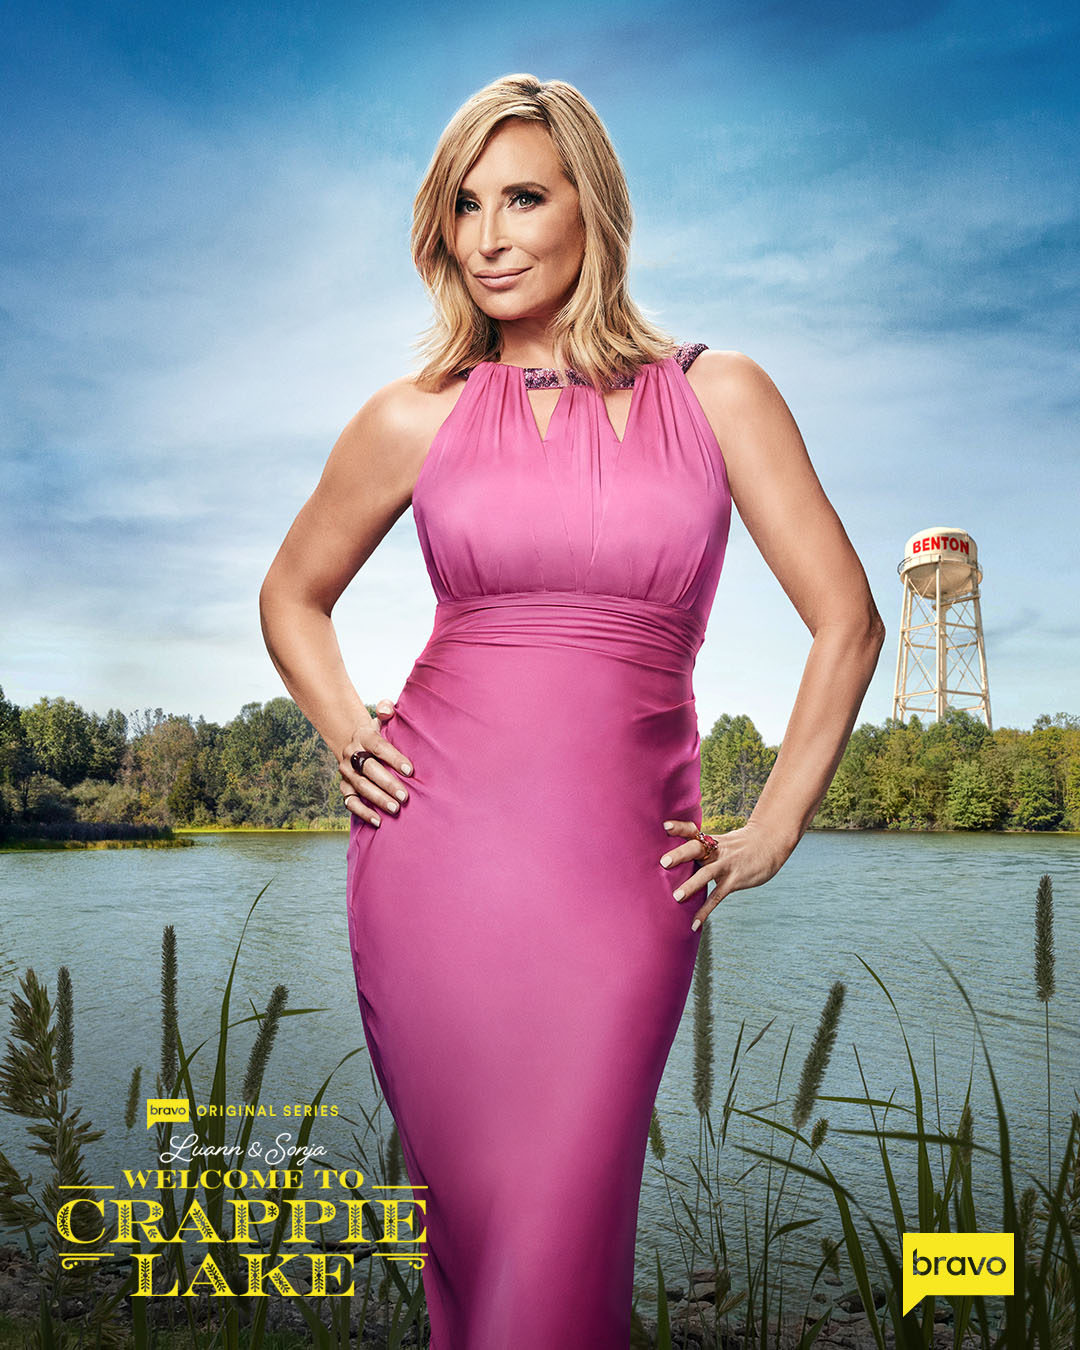 Extra Large TV Poster Image for Luann and Sonja: Welcome to Crappie Lake (#3 of 3)